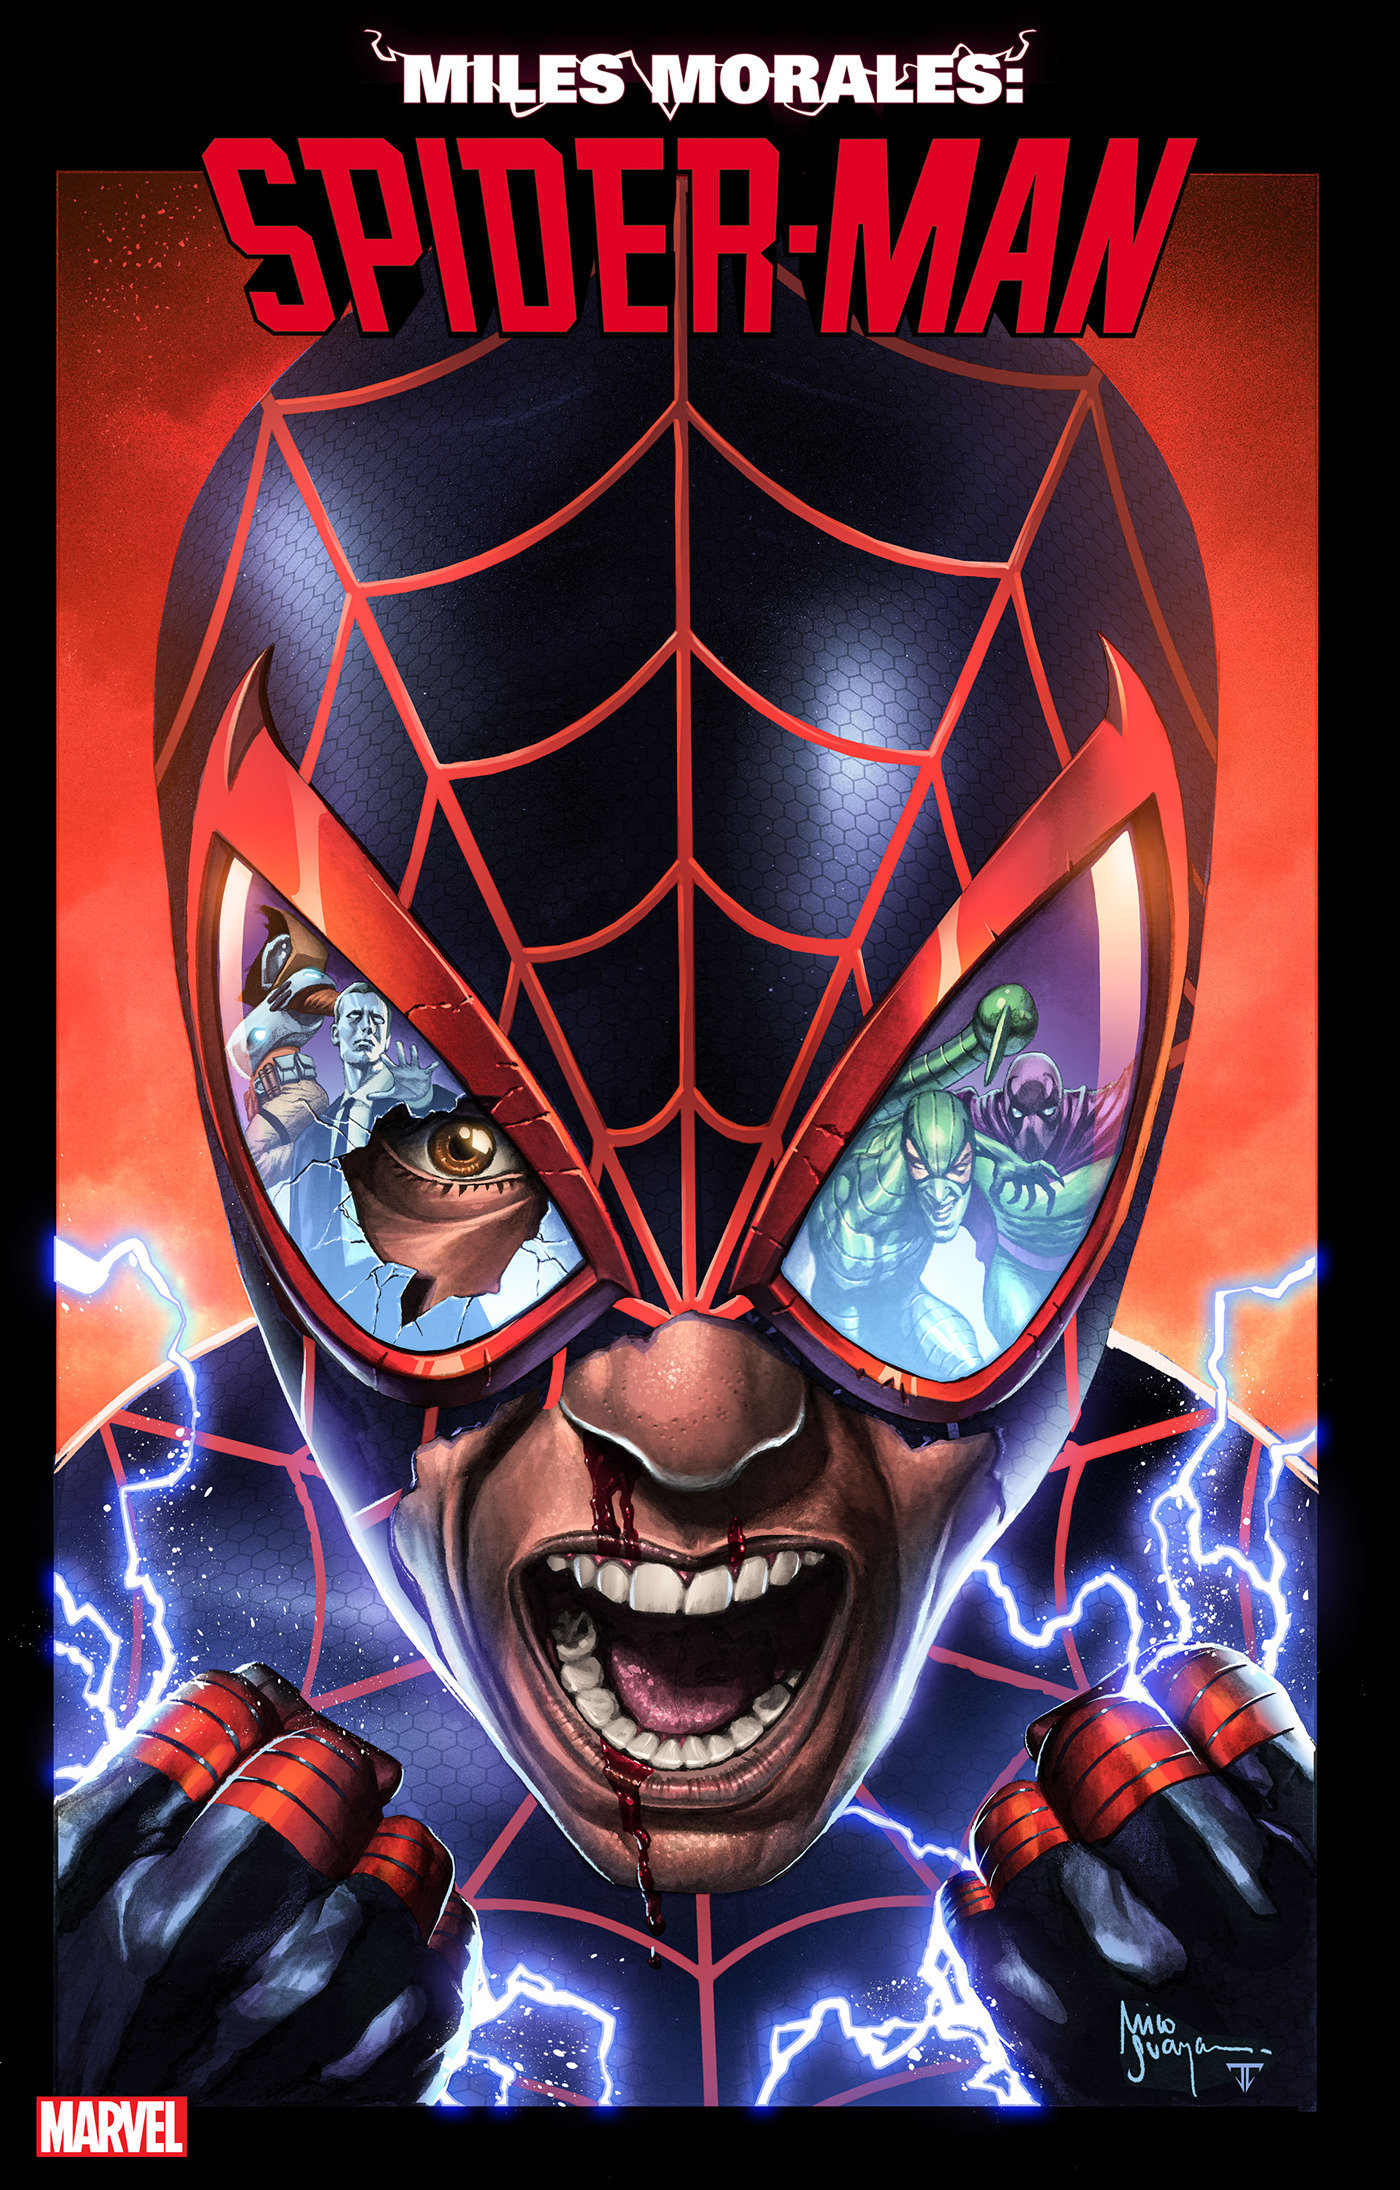 Miles Morales: Spider-Man #8 Mico Suayan 1 for 25 Incentive Variant